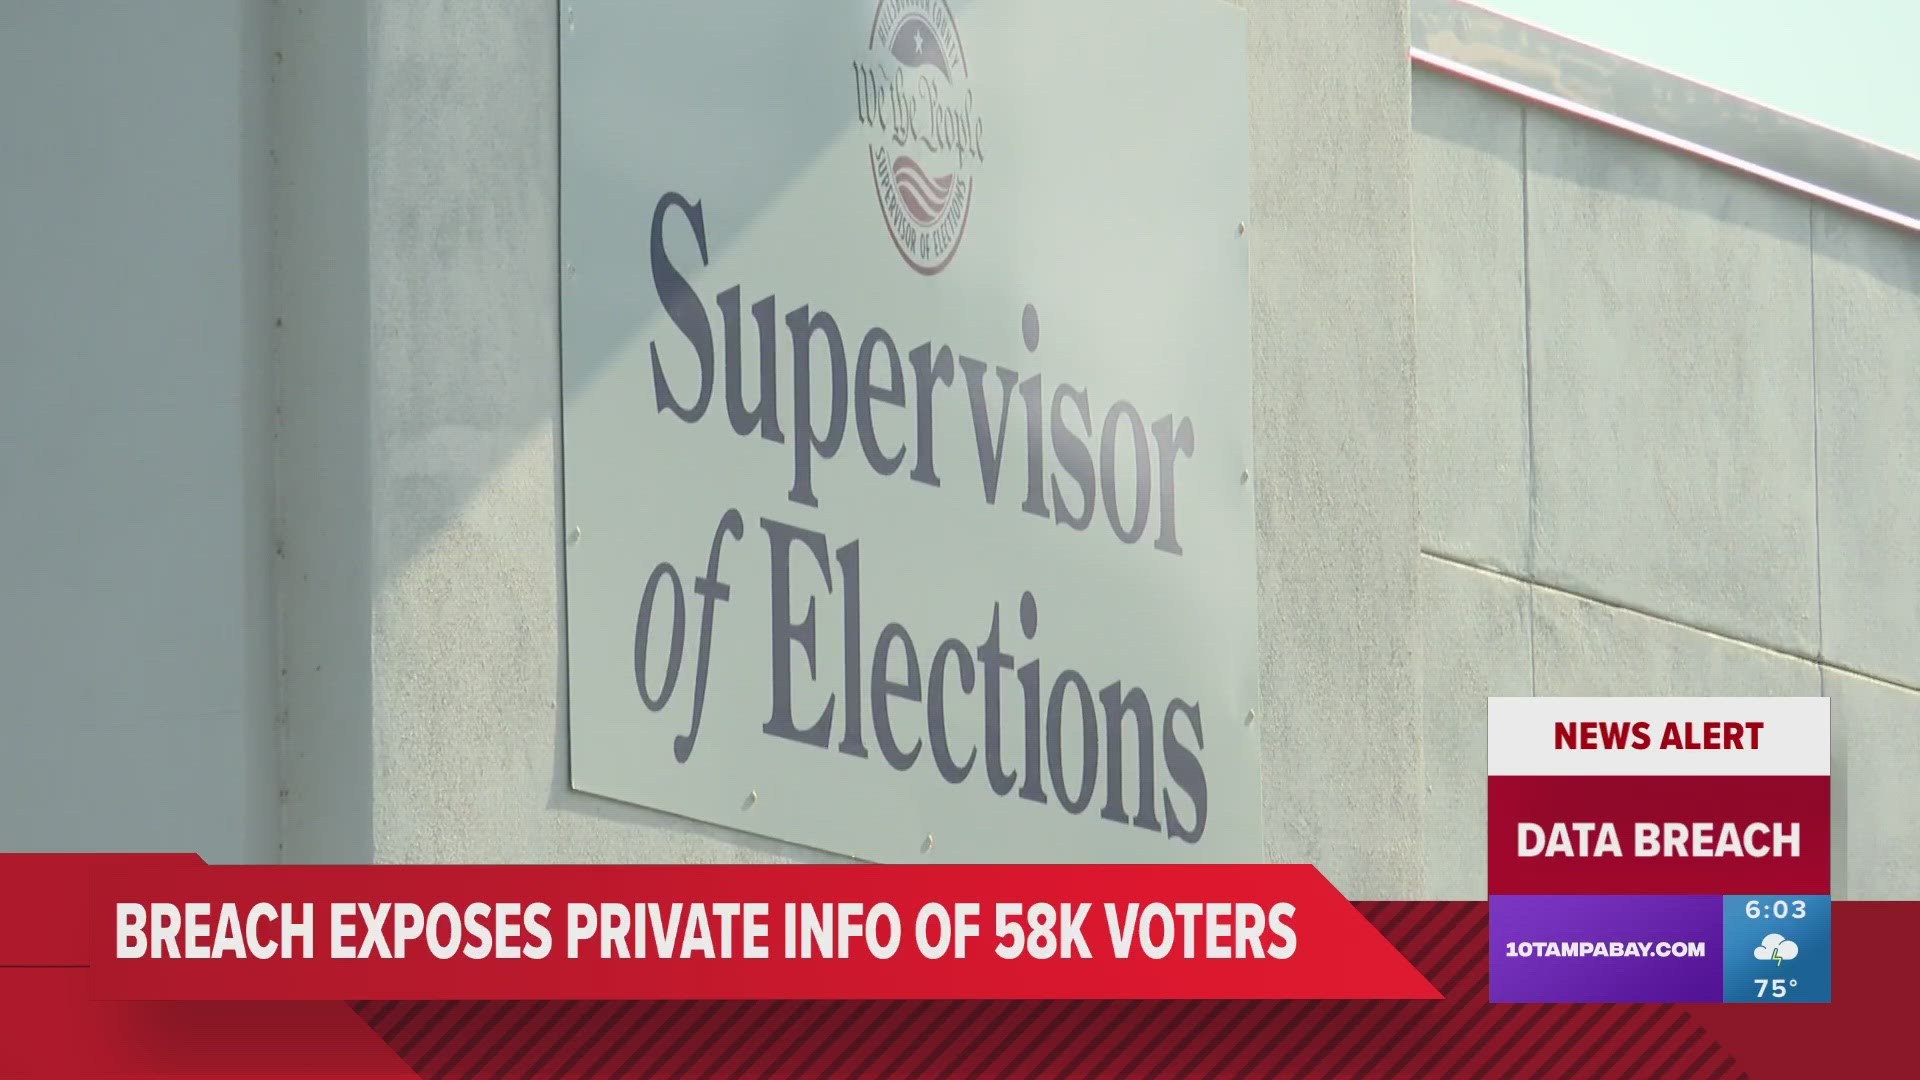 Officials believe the unauthorized user accessed Hillsborough County voters' social security or driver's license numbers.